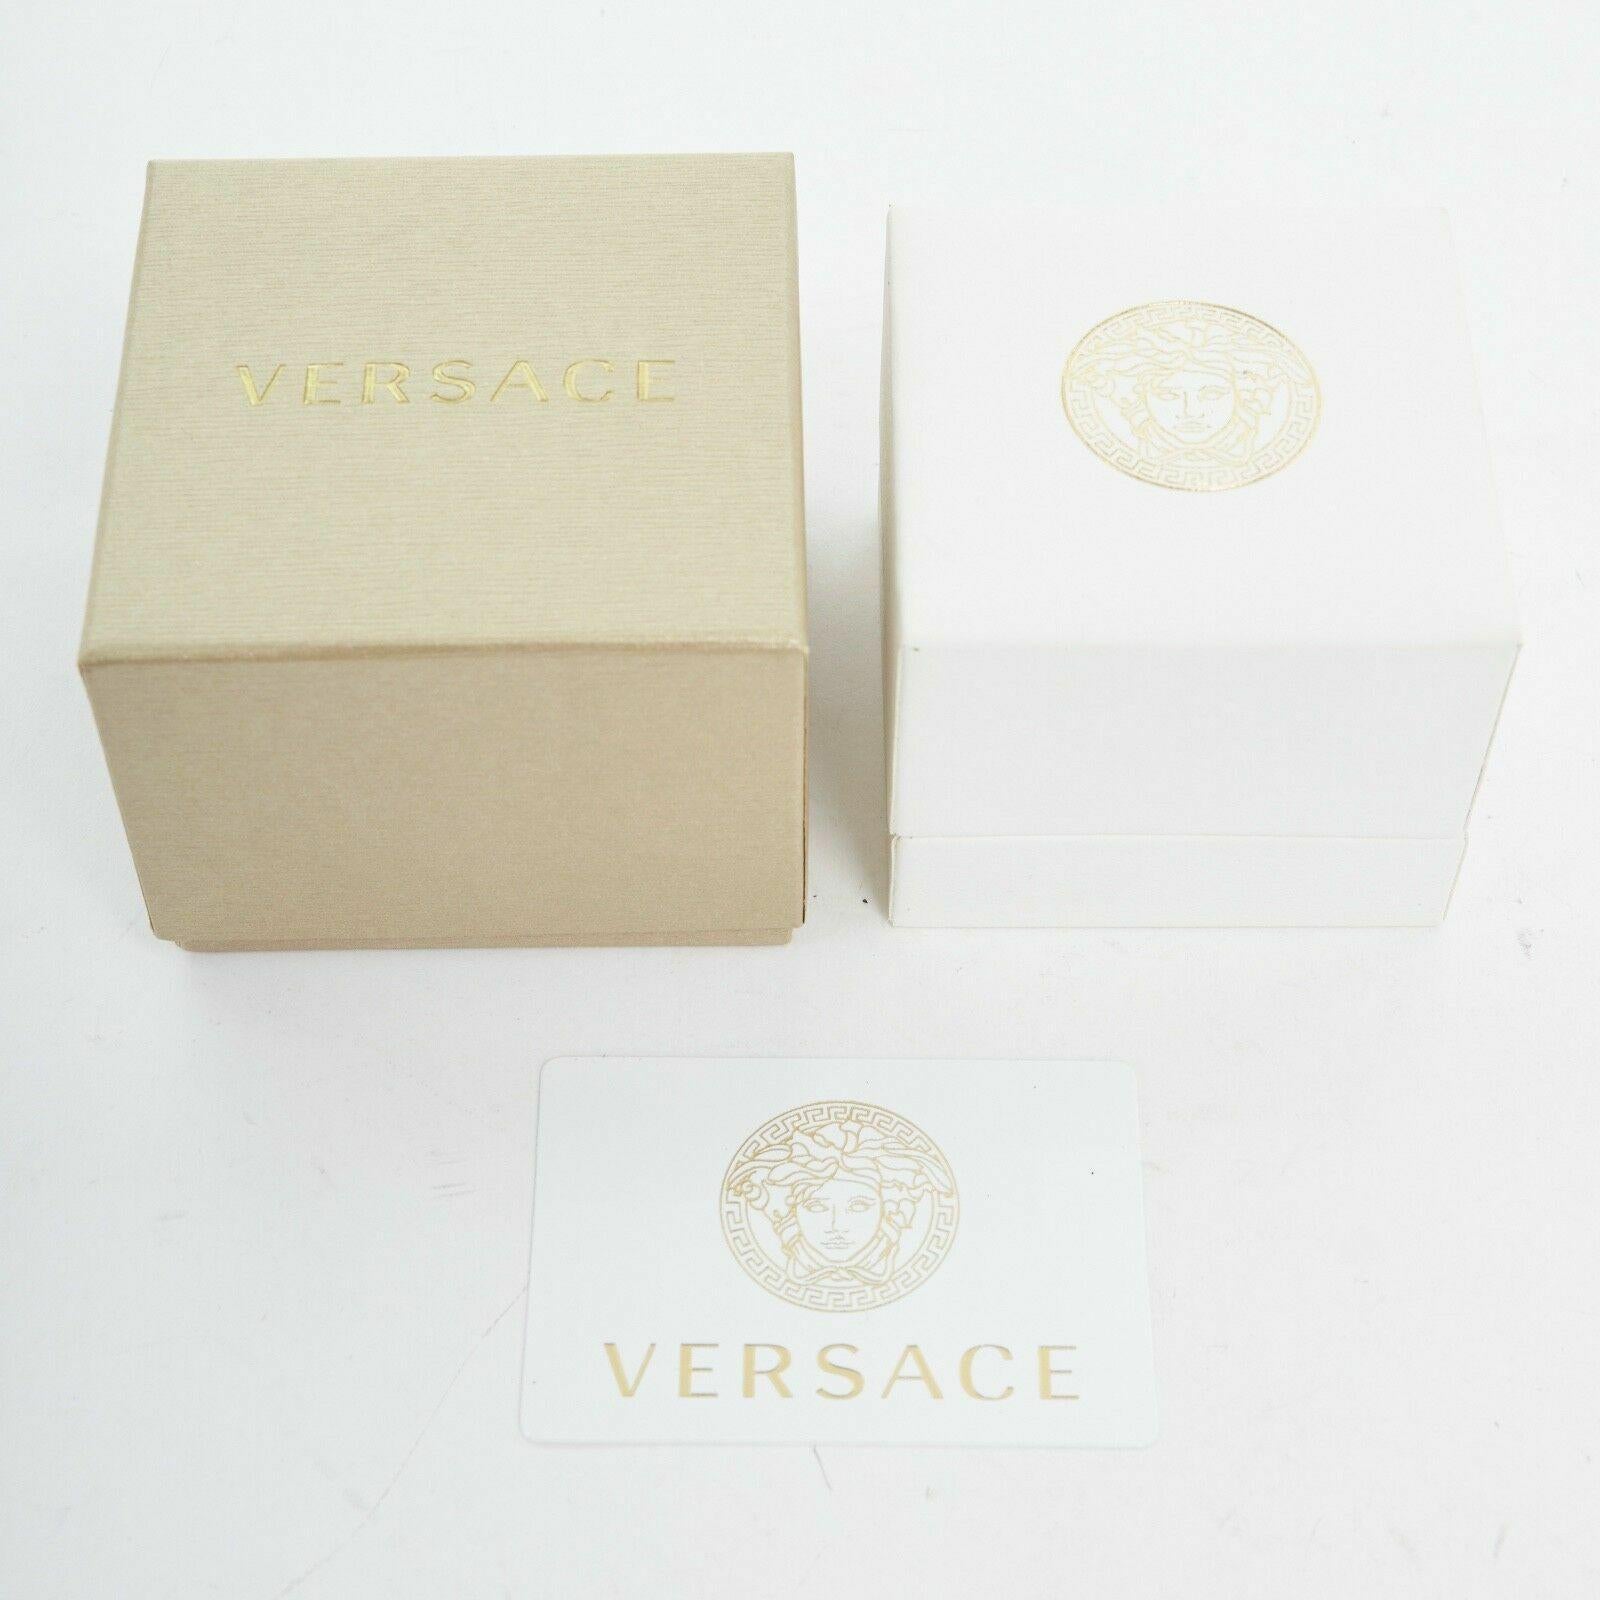 Women's new VERSACE Palazzo Medusa head gold plated signature simple band ring 11